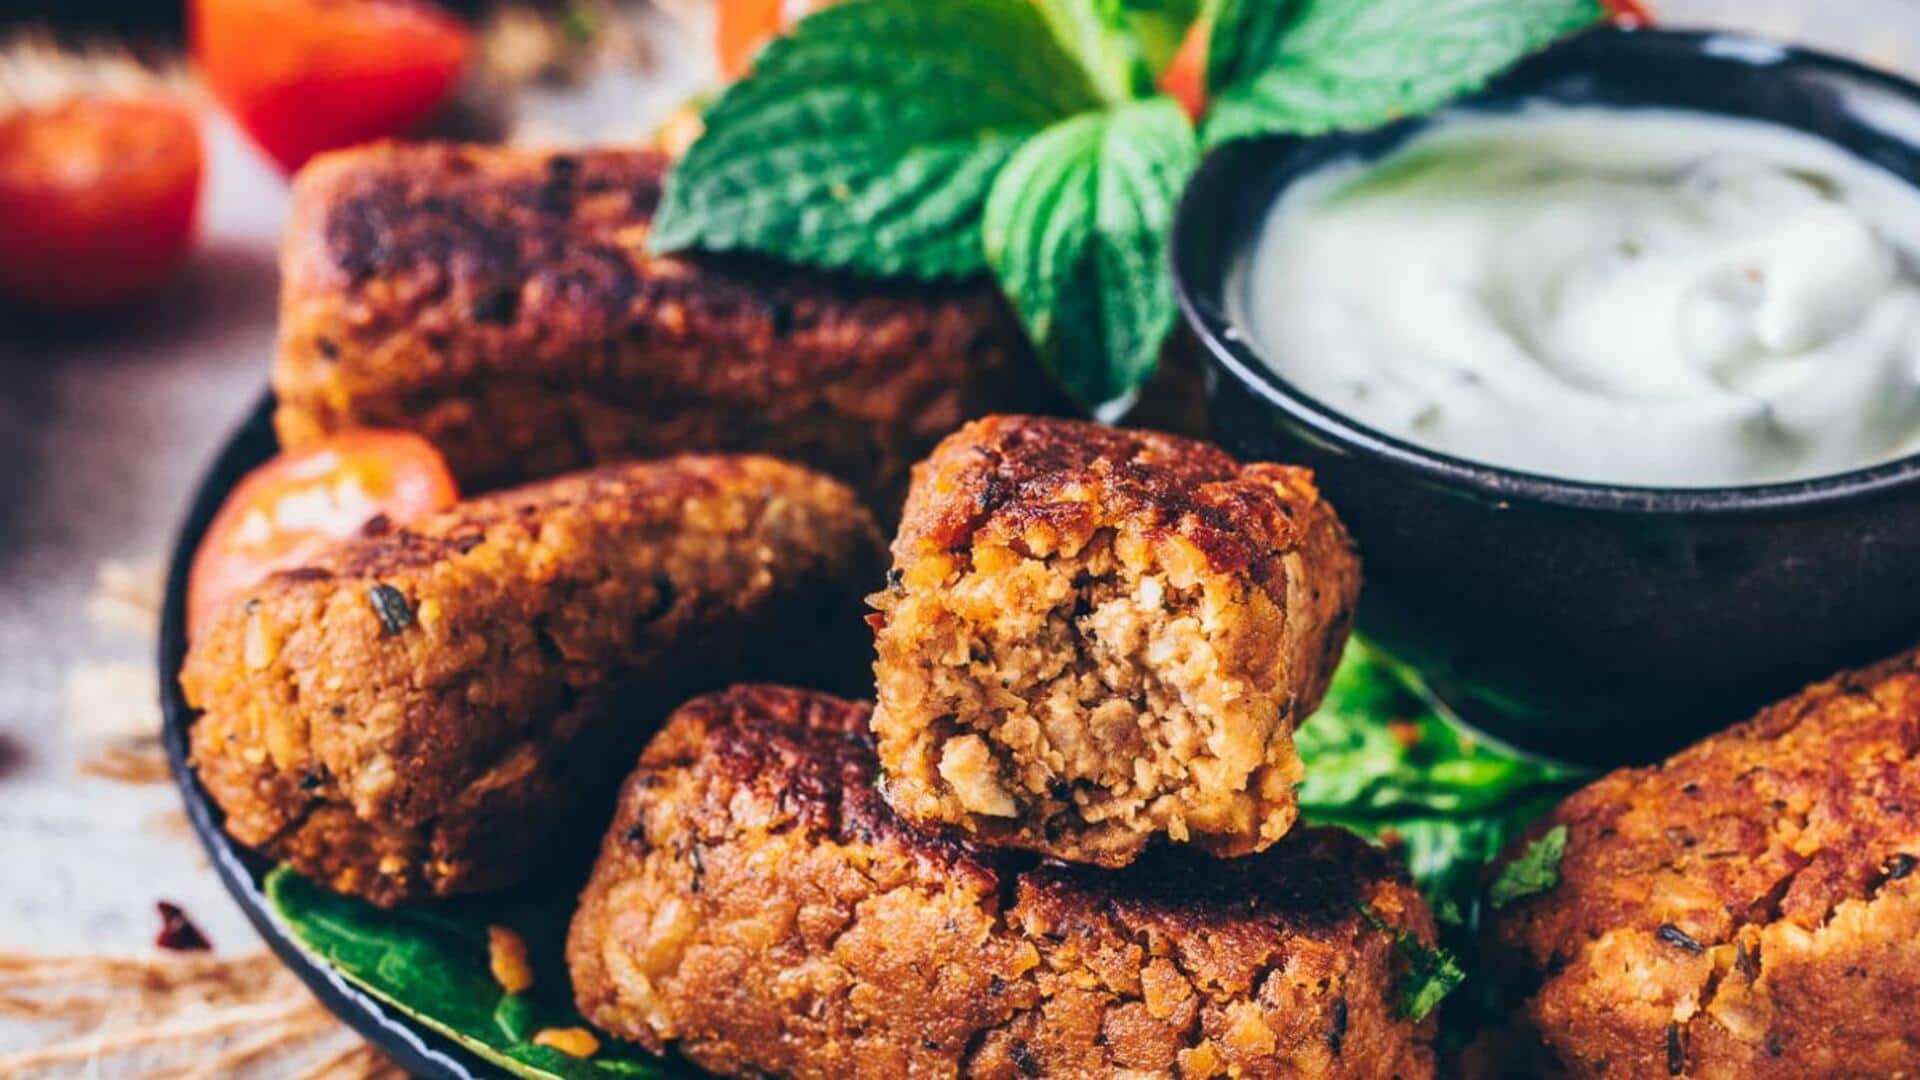 Feeling hungry? Cook and savor this vegan cevapi